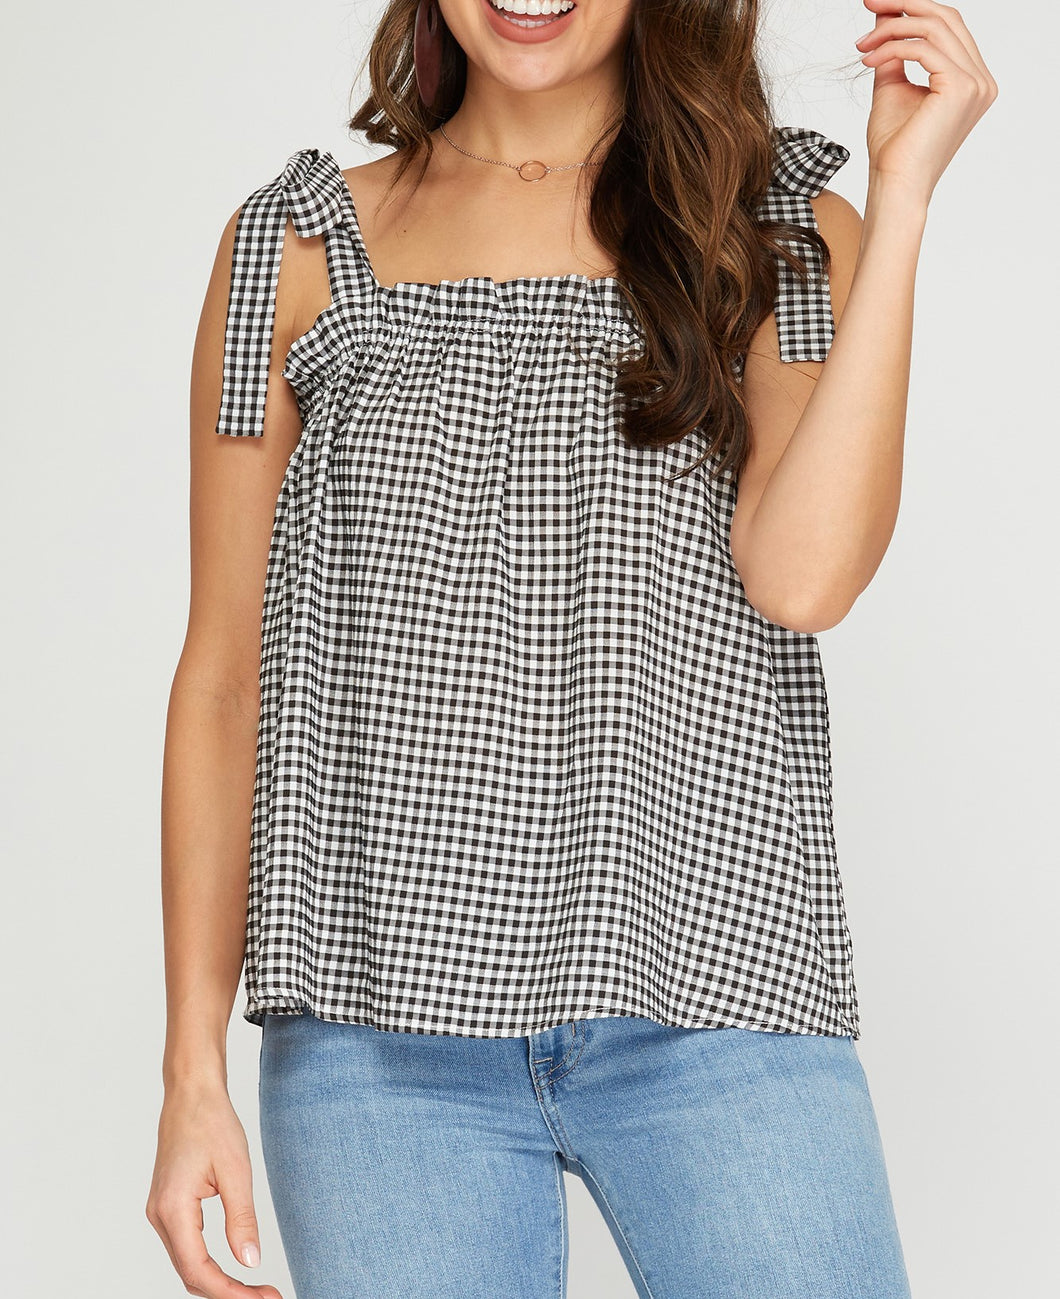 sleeveless gingham top with shoulder ties - black/white